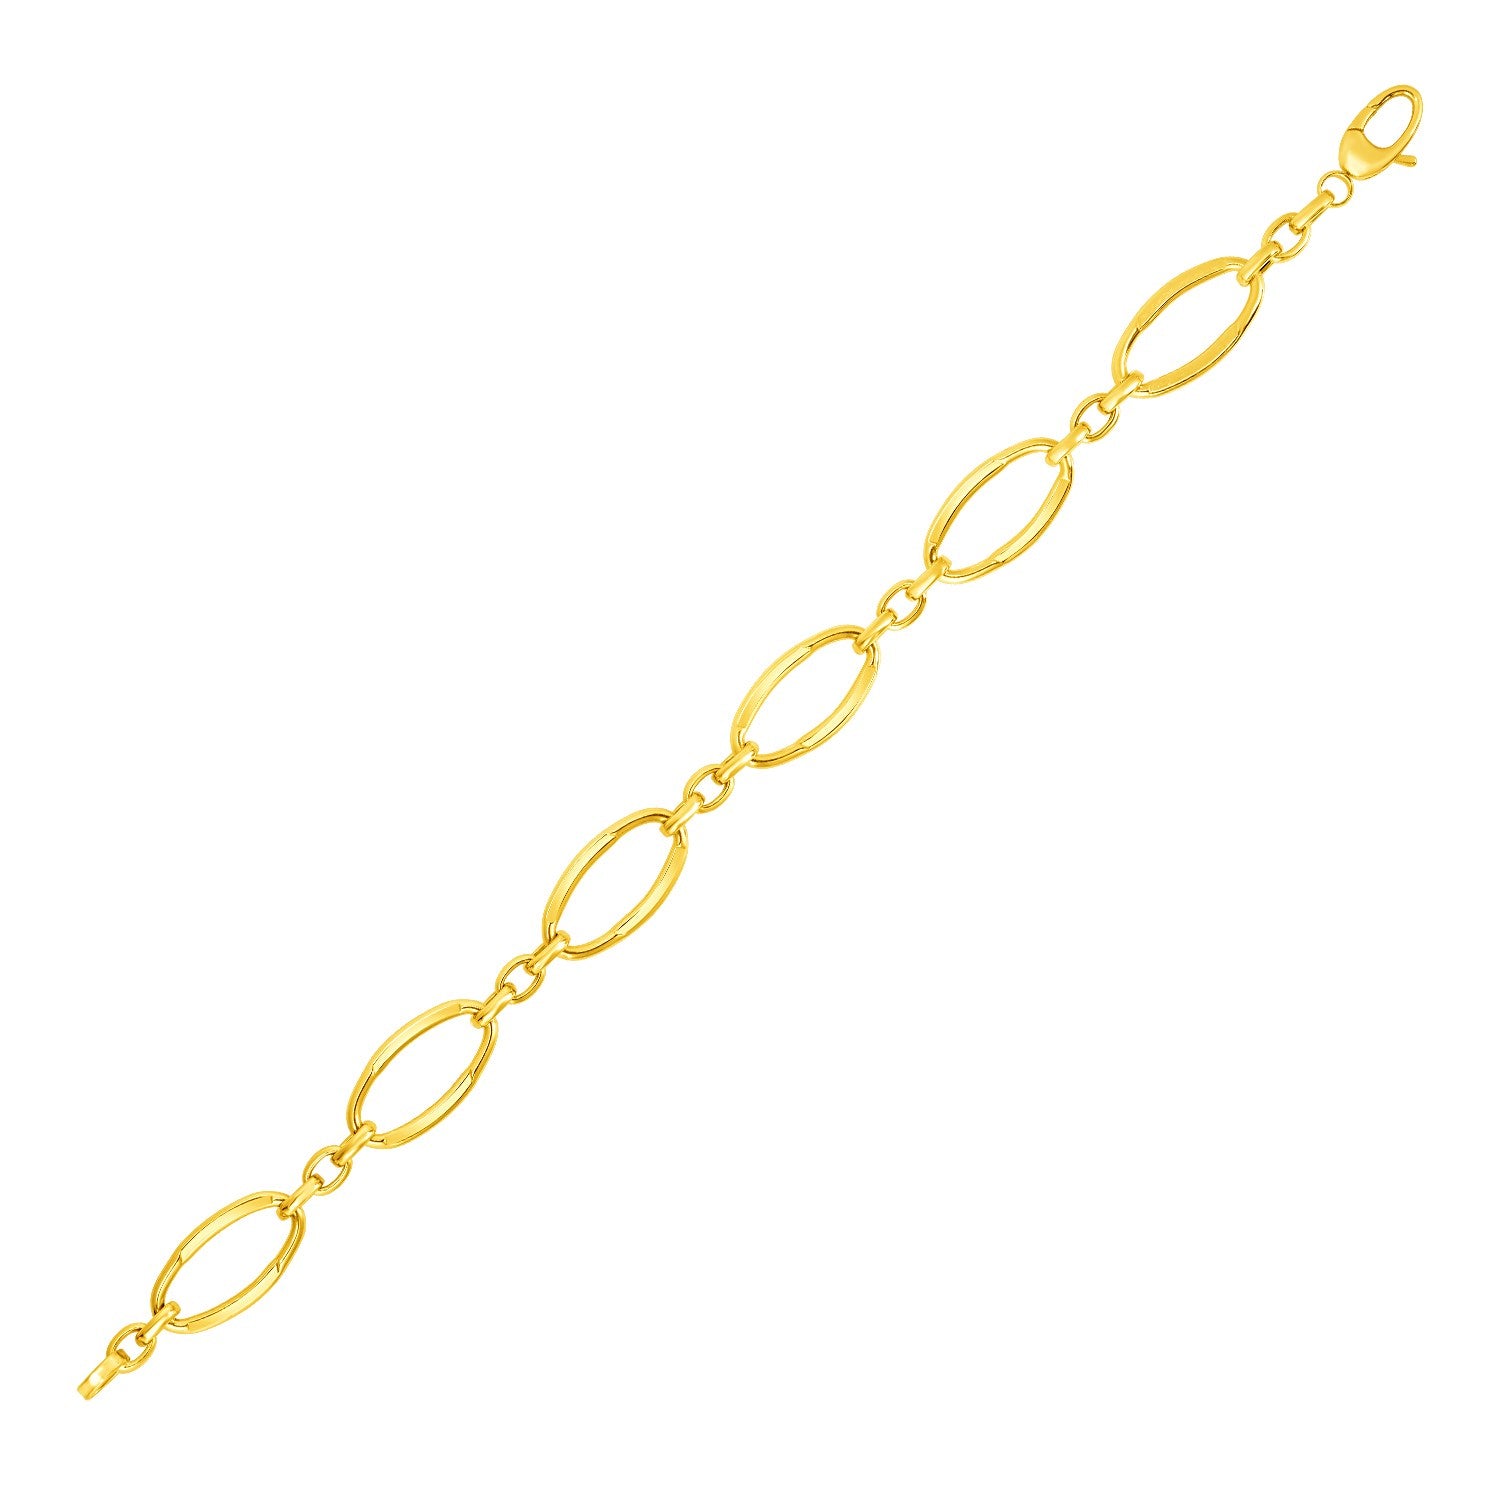 14k Yellow Gold Bracelet with Polished Oval Links